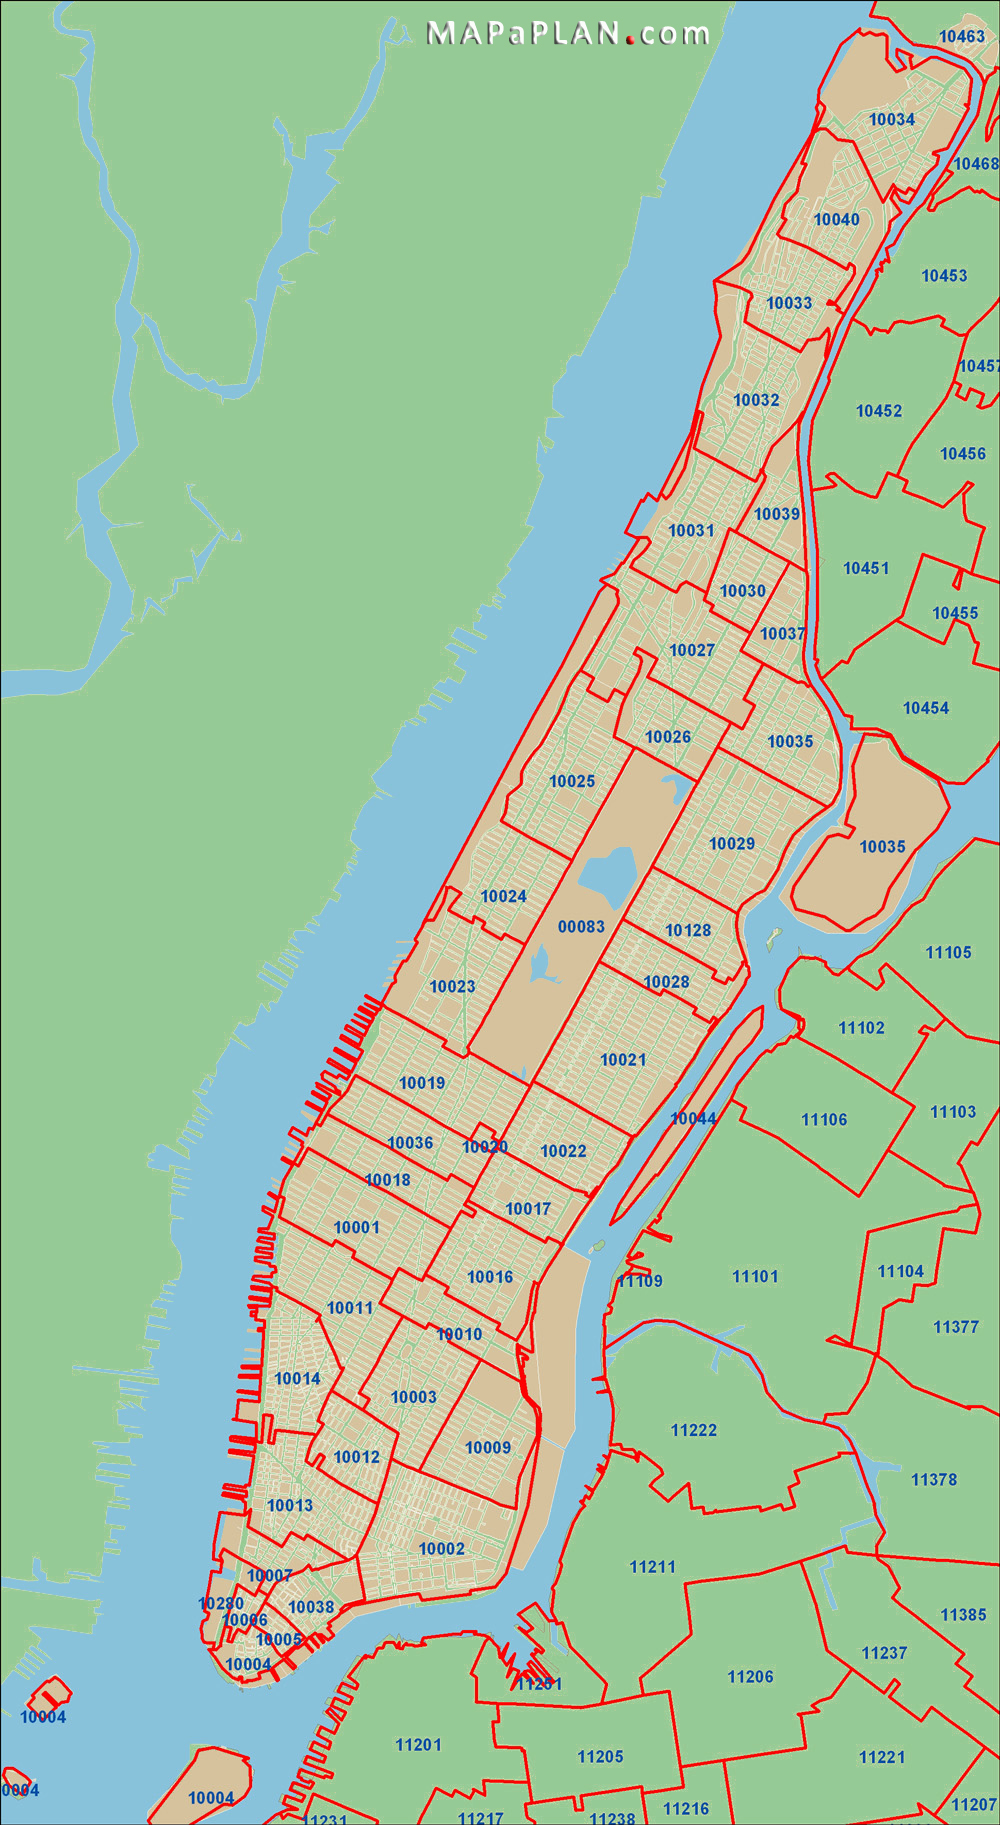 postal-areas-zip-codes-new-york-top-tourist-attractions-map